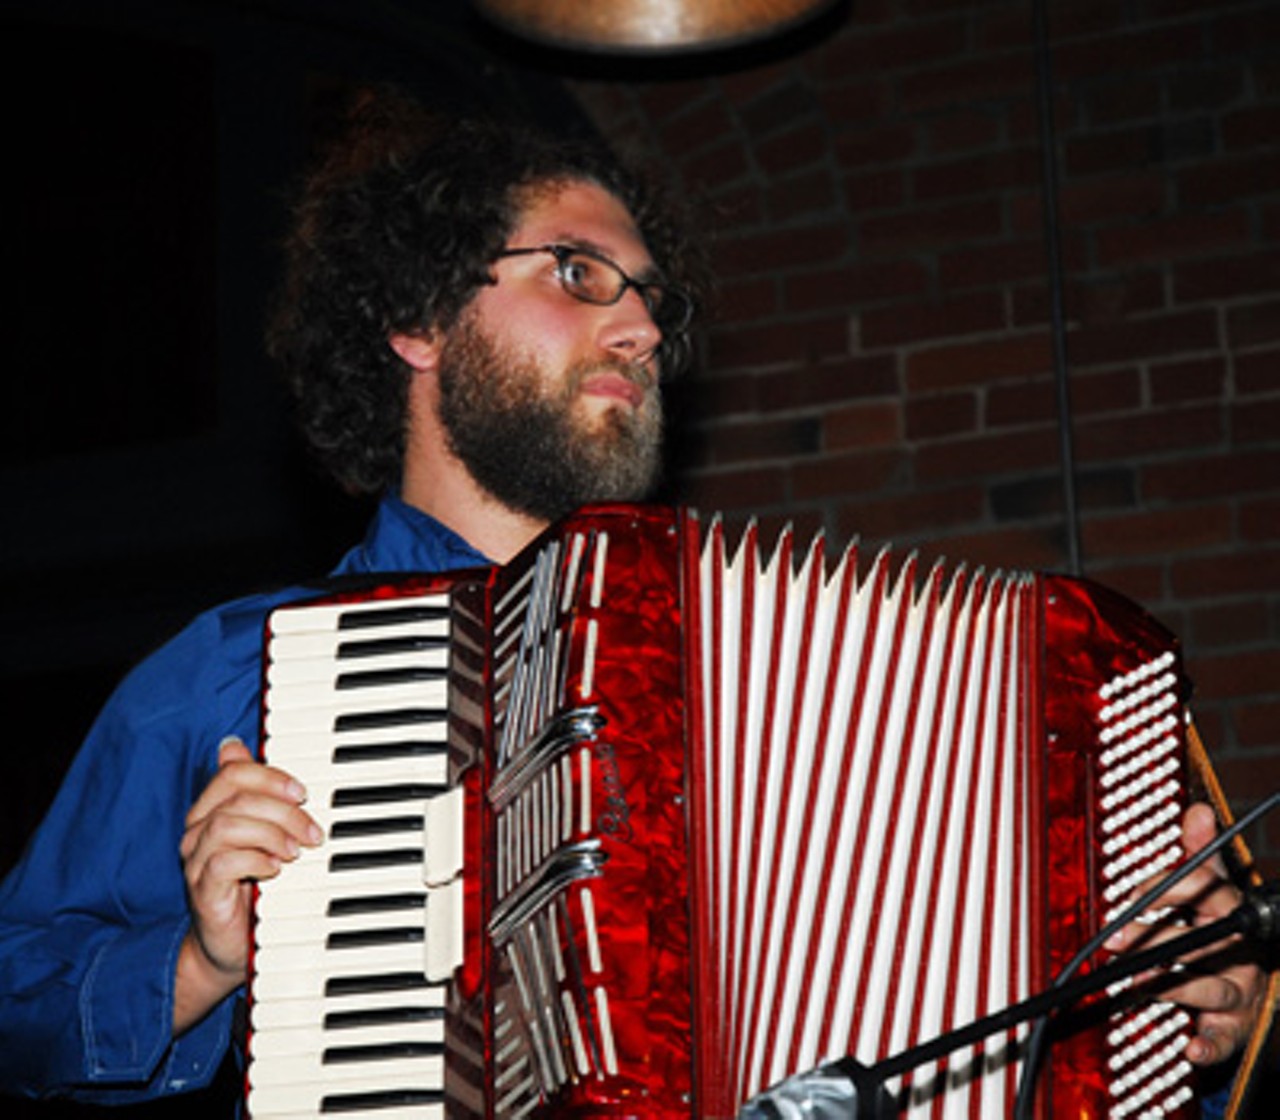 JJ Hamon plays the accordion on January 2 at the Schlafly Tap Room.